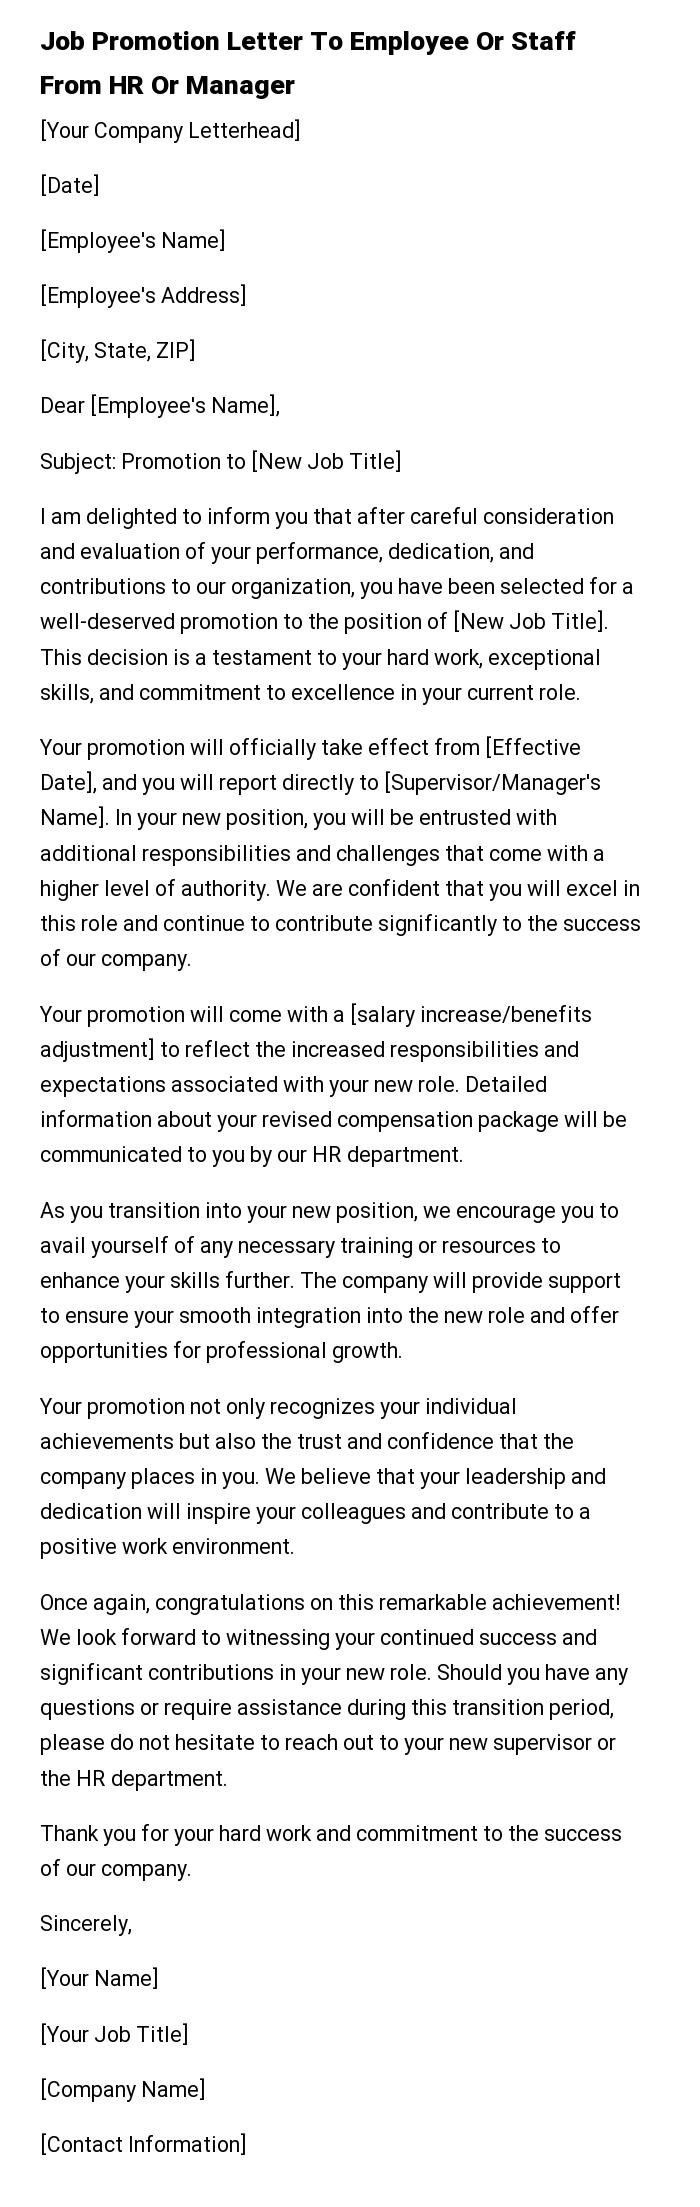 Job Promotion Letter To Employee Or Staff From HR Or Manager